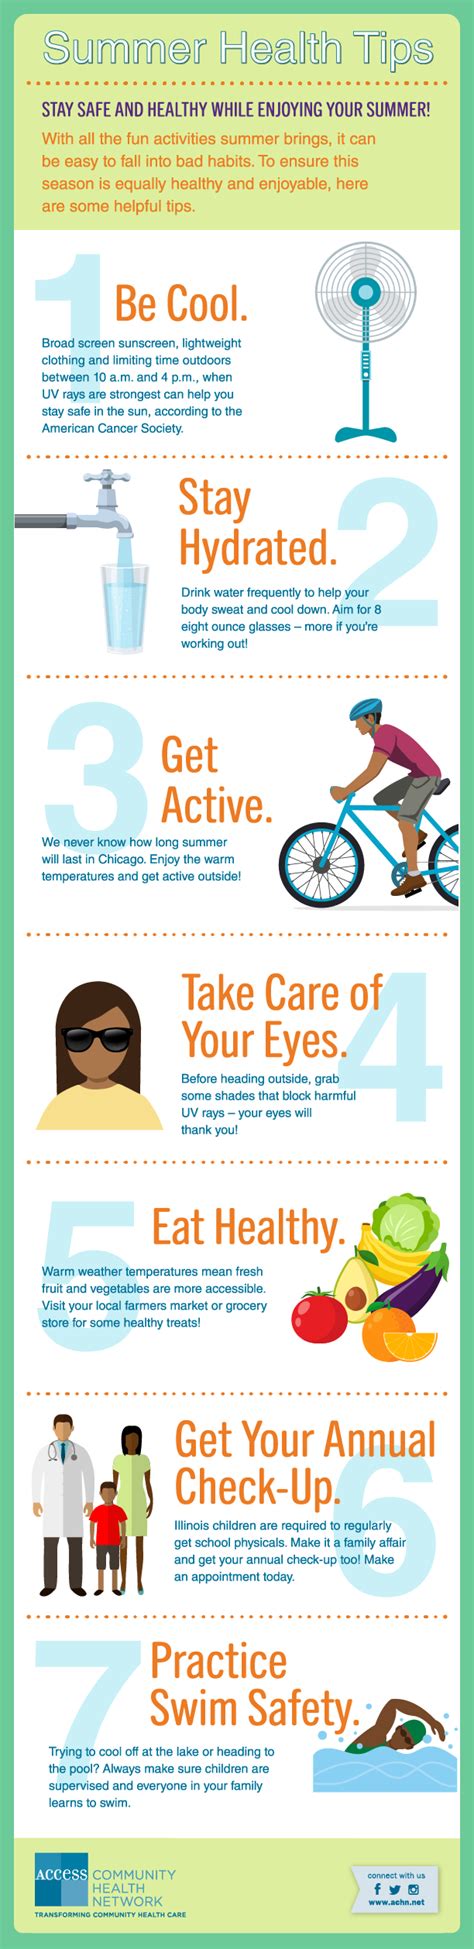 7 Ways To Stay Healthy In Chicago This Summer Access Community Health